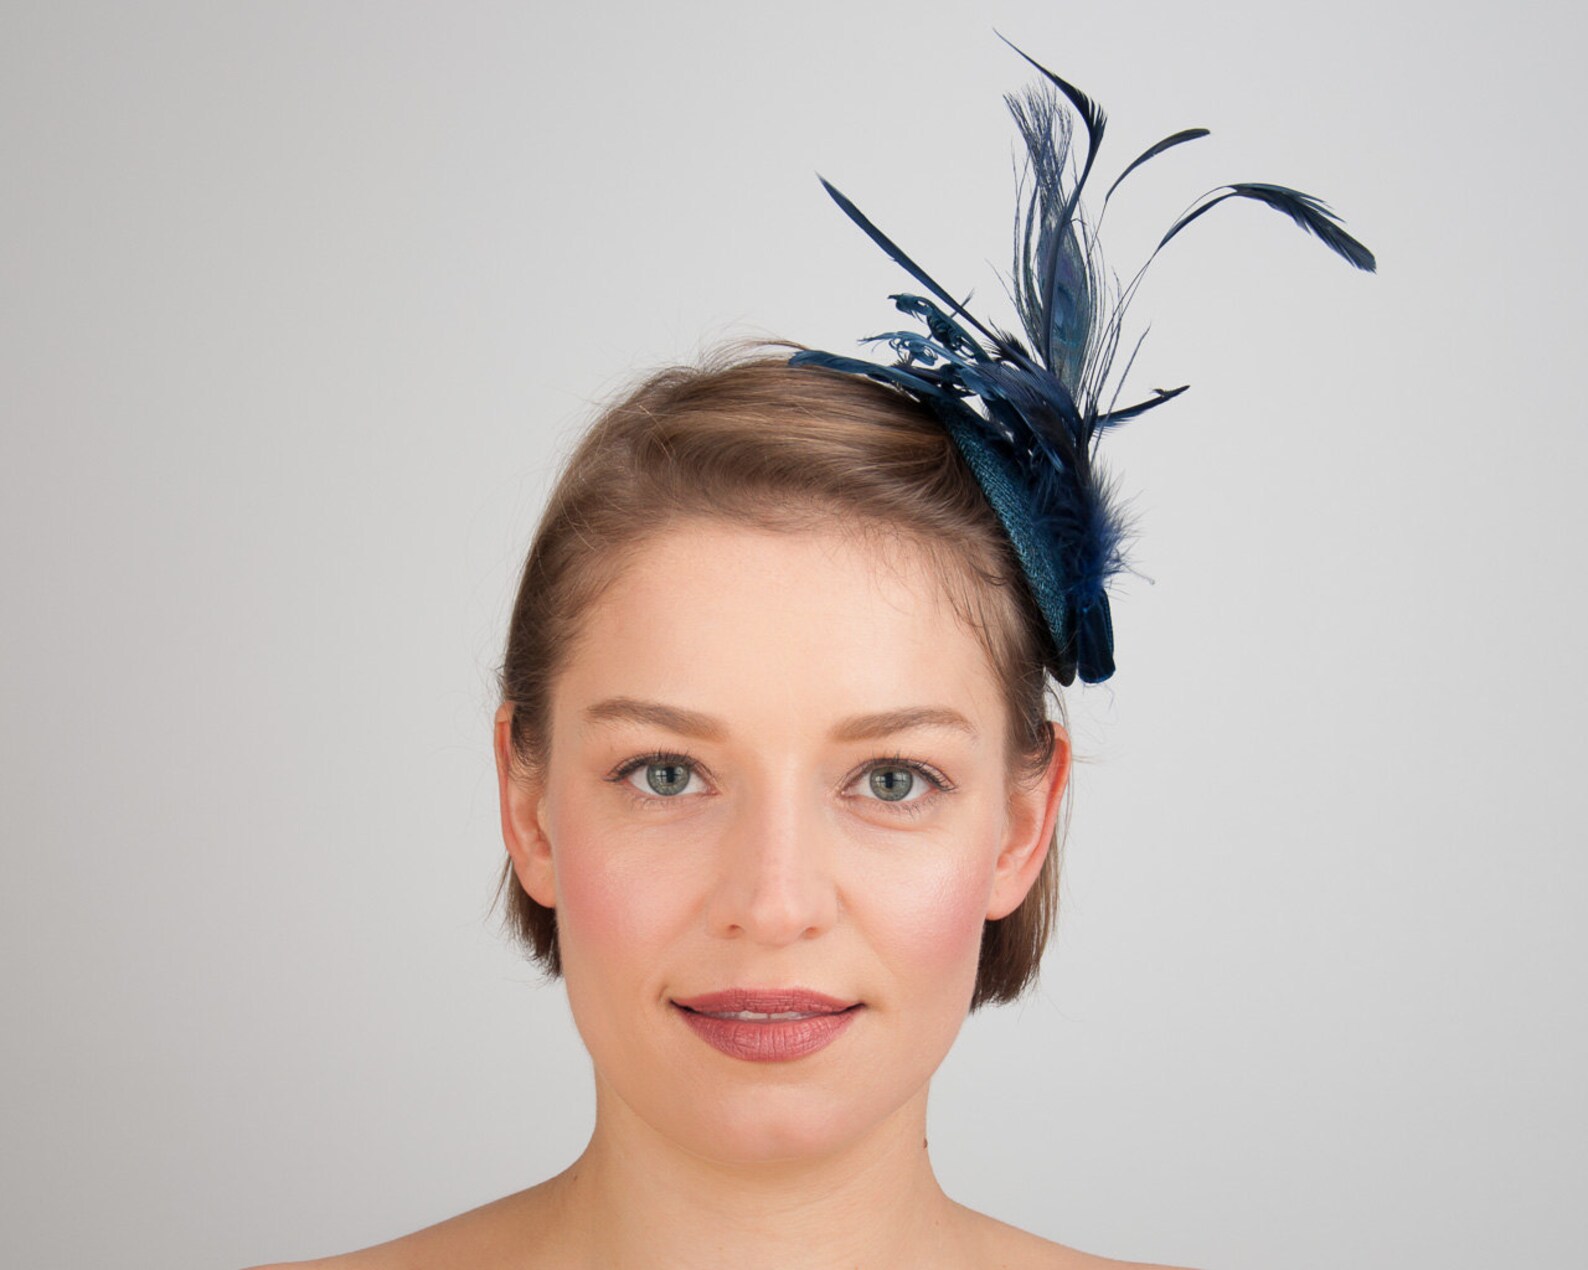 5. "Blue Hair Accessories for the Ultimate Bachelorette Party Glam" - wide 5